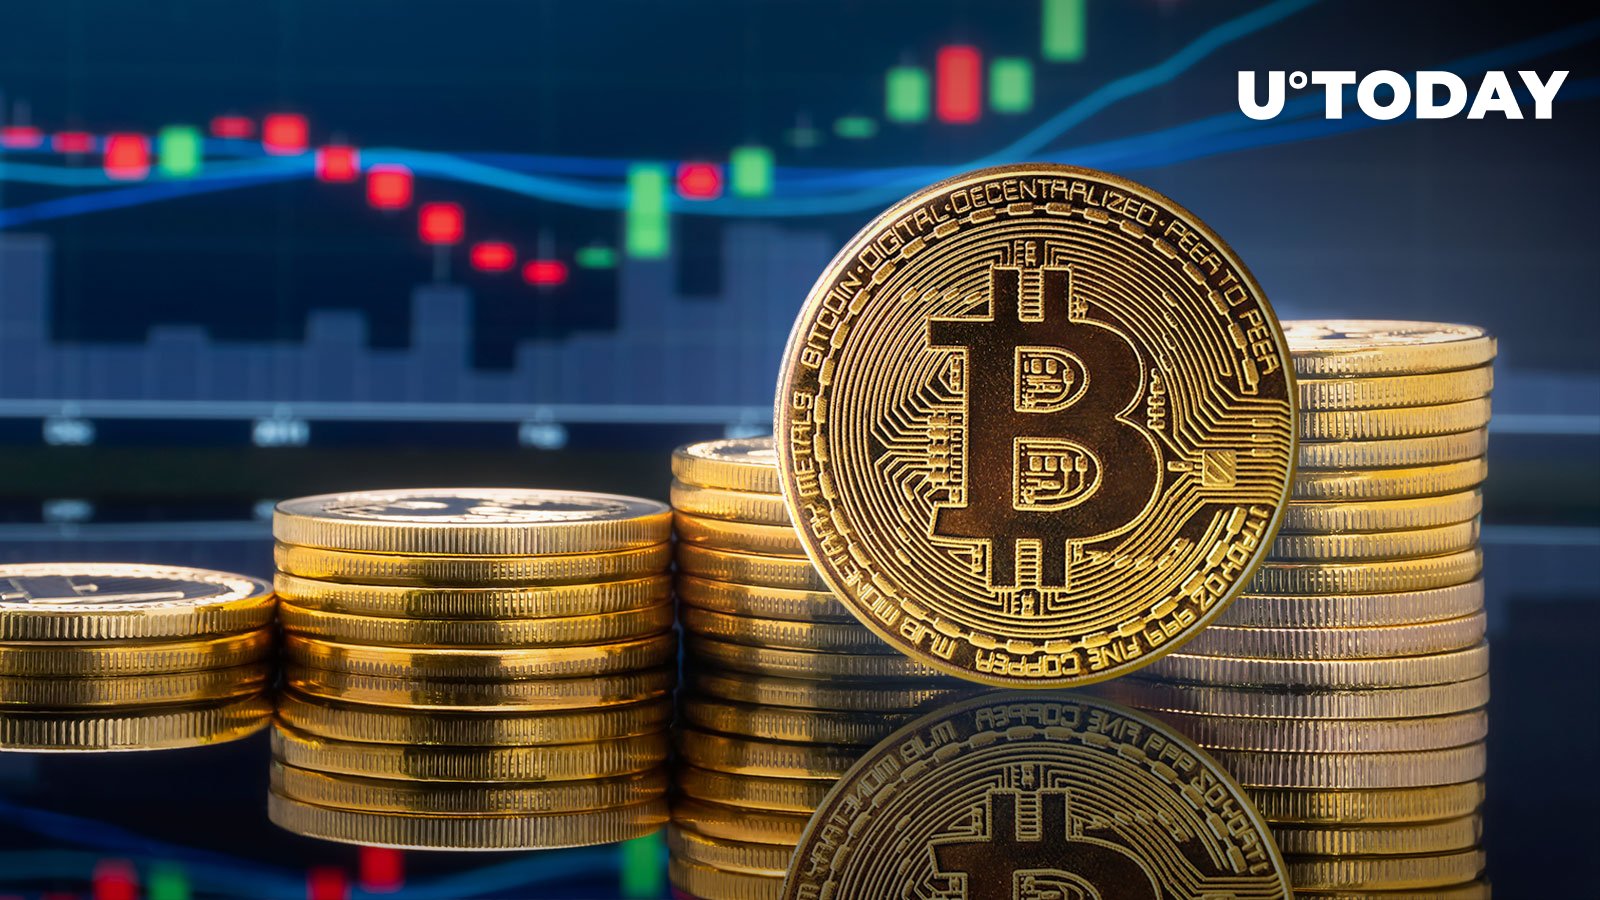 Analyst Predicts Bitcoin to Hit $86,500 in April, Citing Bullish Trends and Market Sentiment